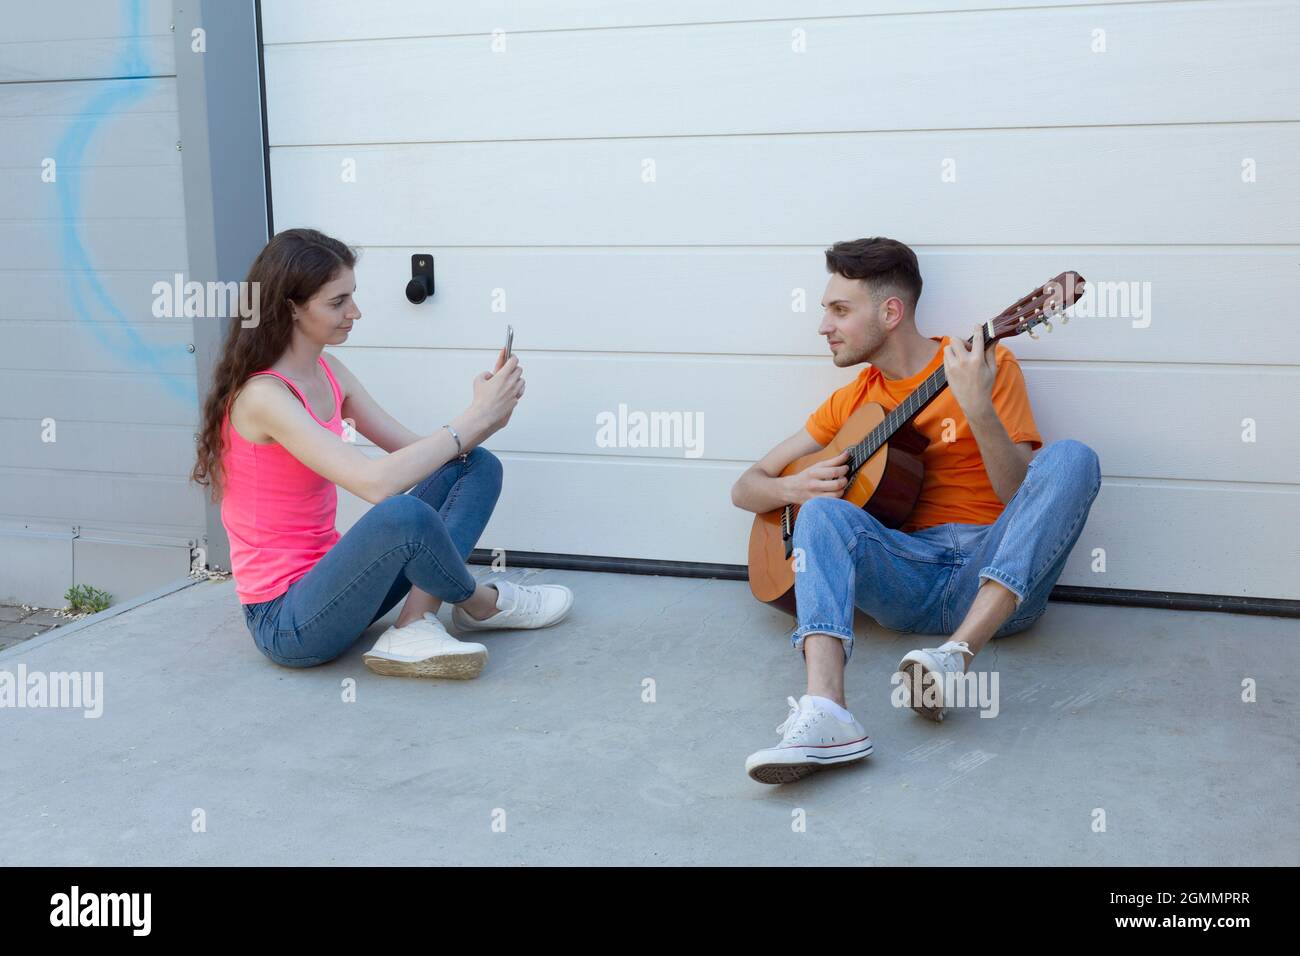 Young woman photographing boyfriend playing guitar in driveway Stock Photo